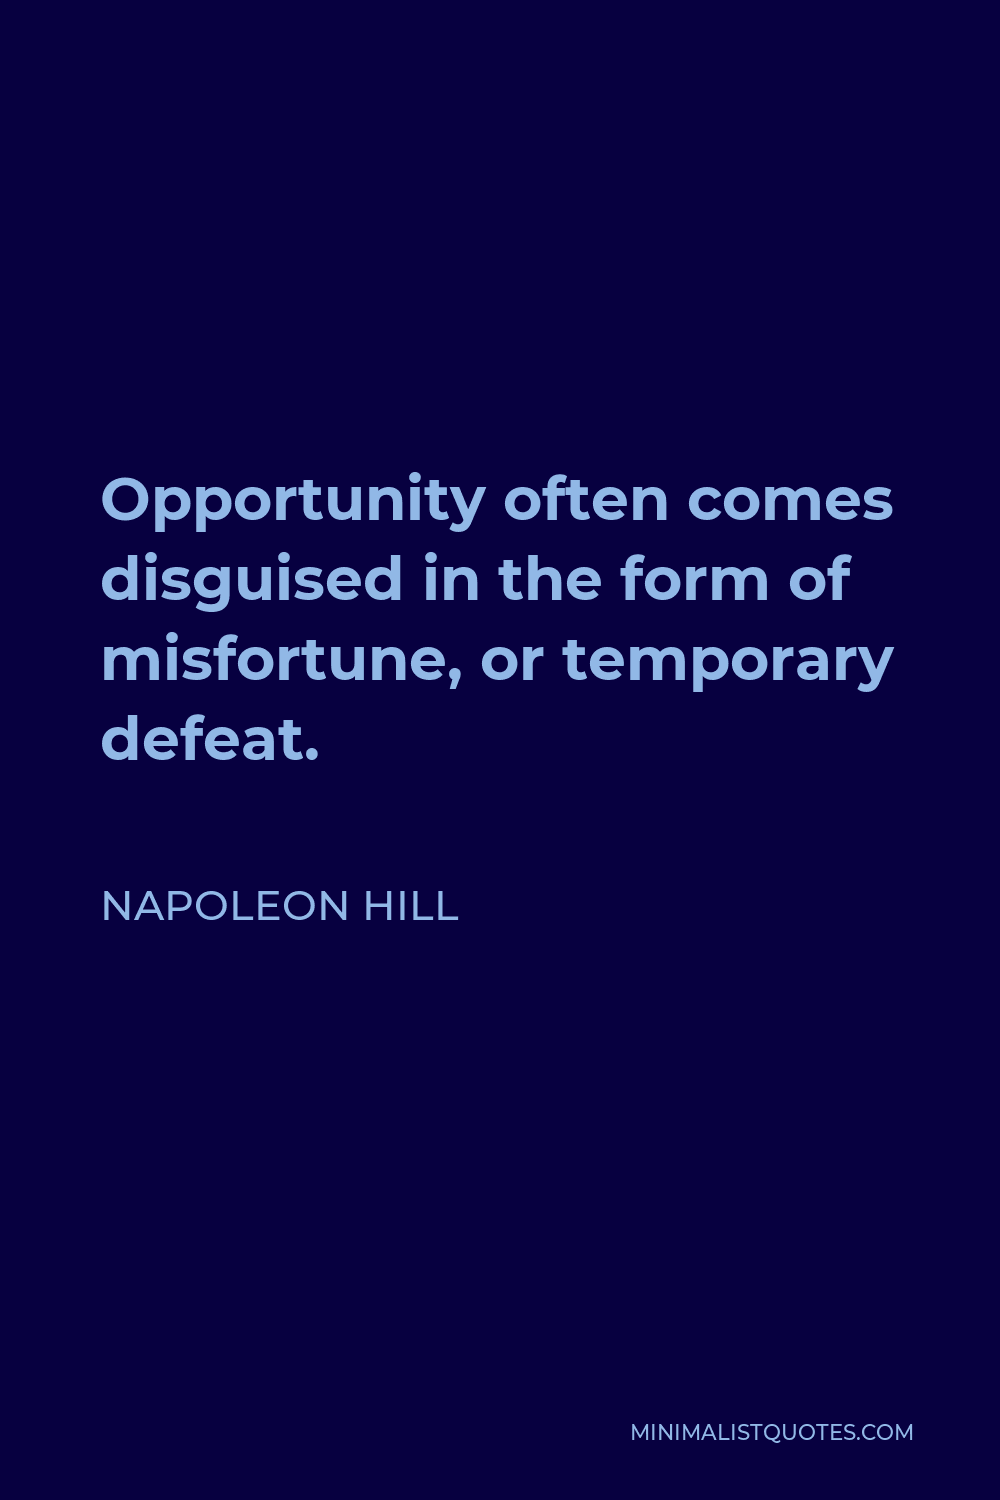 Napoleon Hill Quote - Opportunity often comes disguised in the form of misfortune, or temporary defeat.